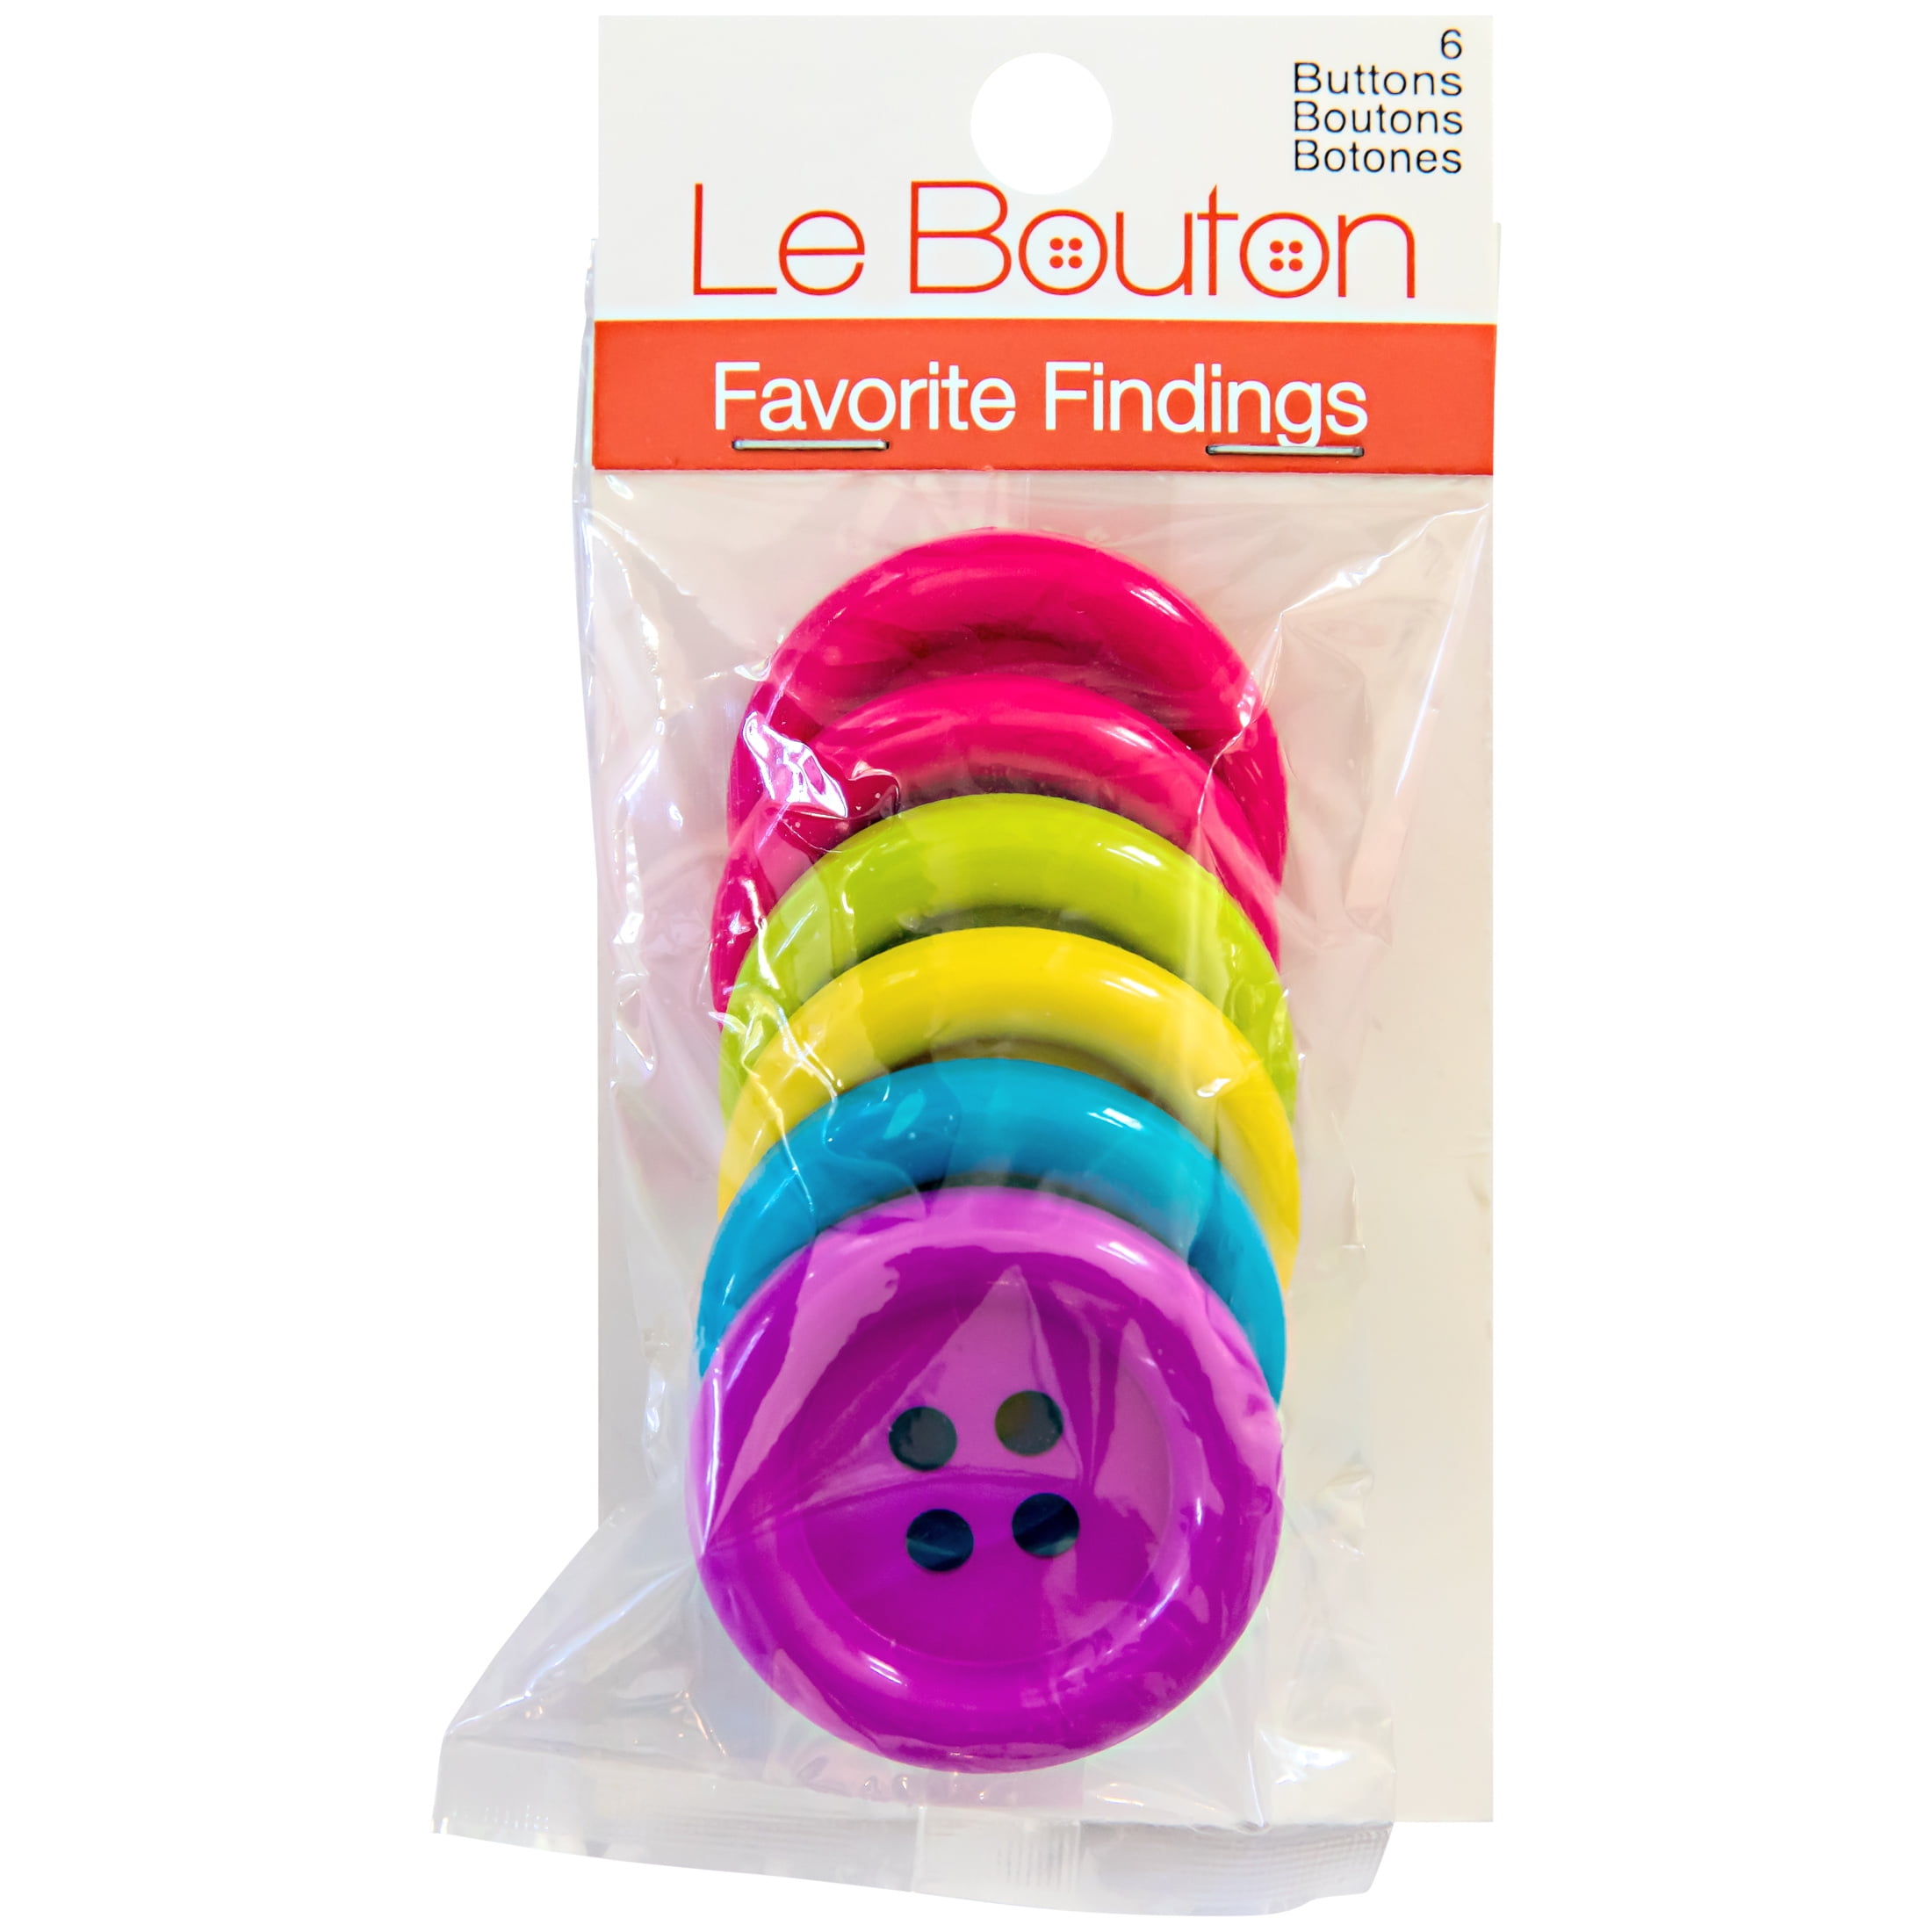 Favorite Findings Fun 1 3/8 4-Hole Big Buttons, 6 Pieces